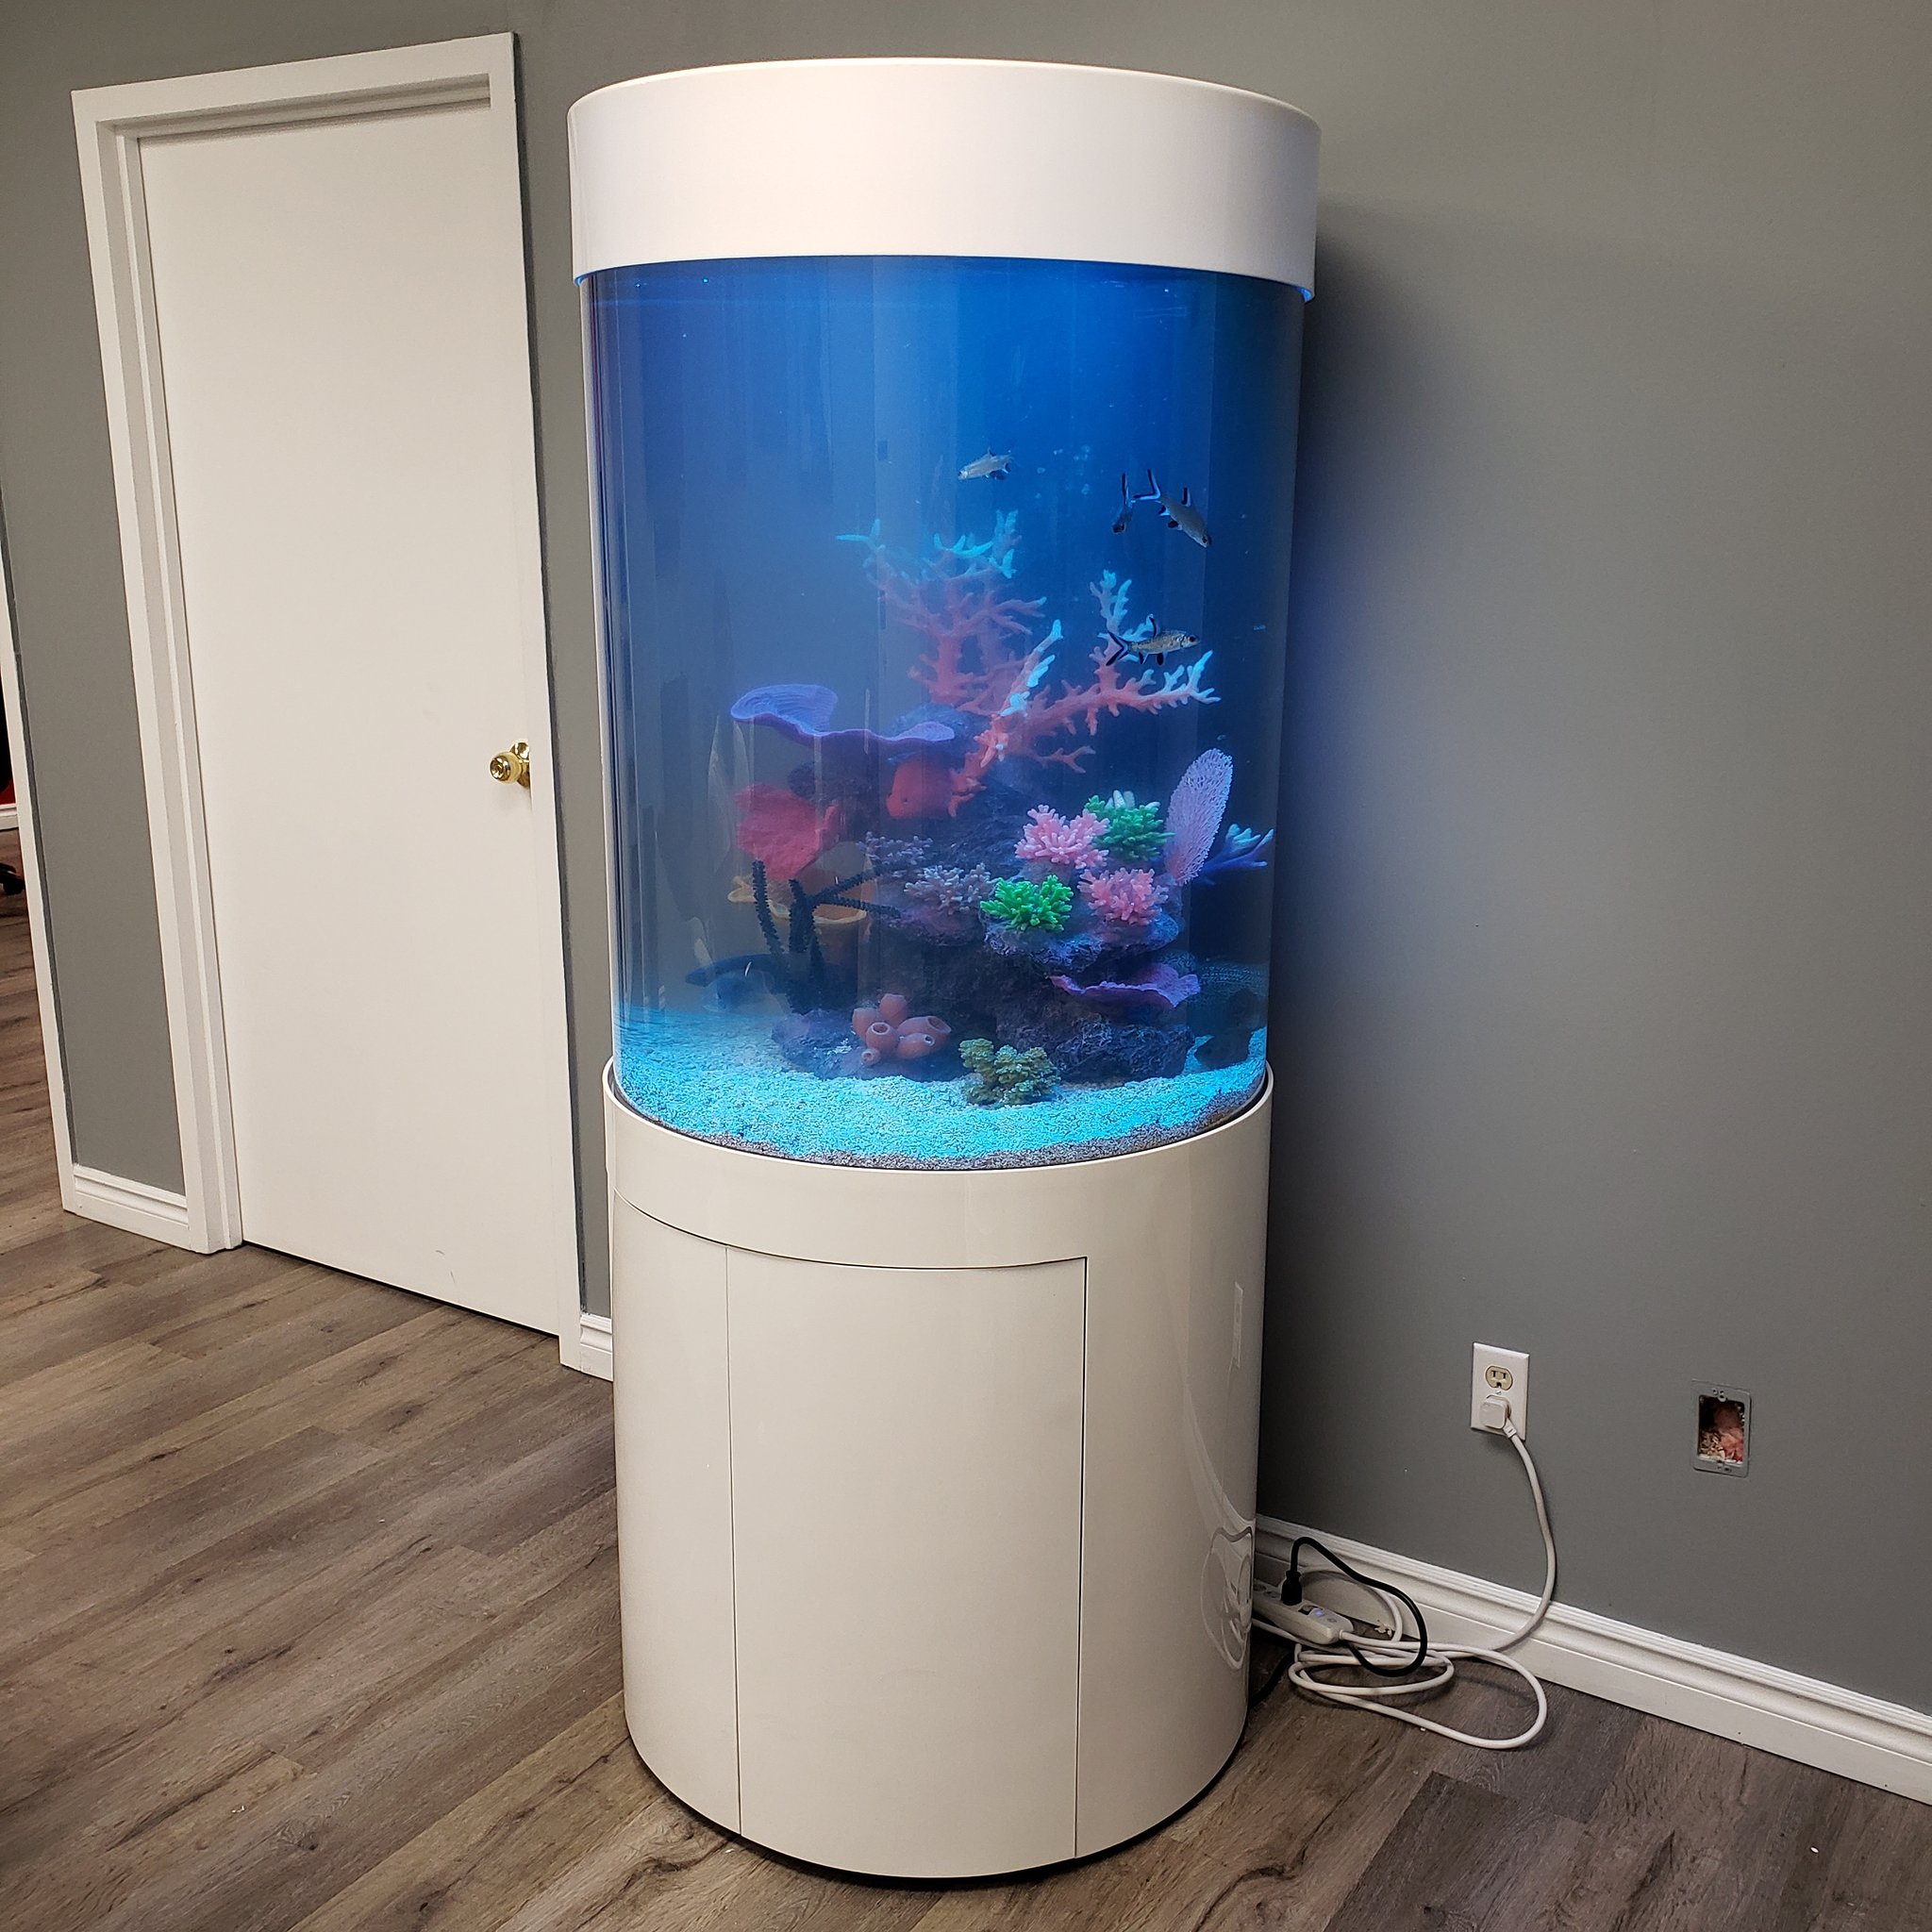 LTAquariums Twitter: "Acrylic cylinder #ltaquariums #aquarium #fishtank #acrylic #cylinderaquarium #customfishtanks #toronto https://t.co/jiAmZxnxPd" / Twitter